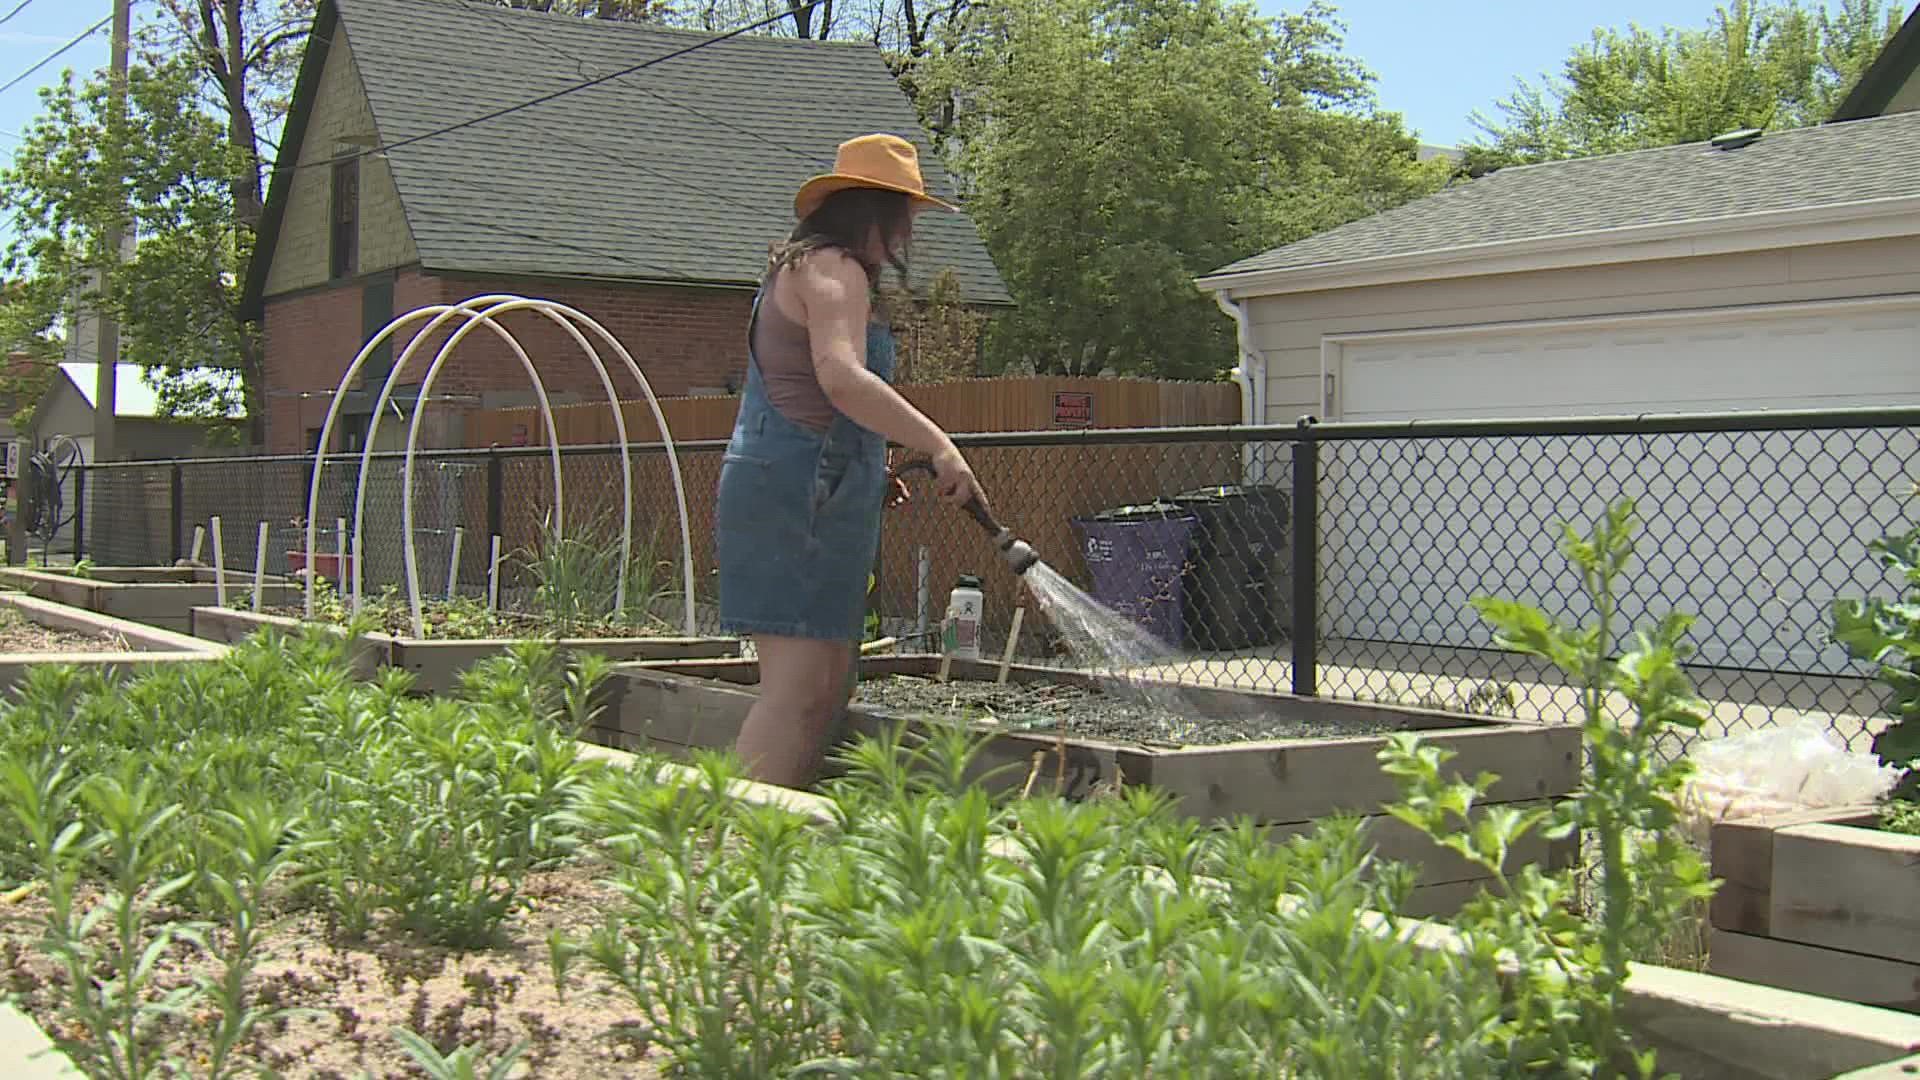 The Metro Caring community garden is working to address access to urban gardening for people who, in some cases, have never had a chance to garden.